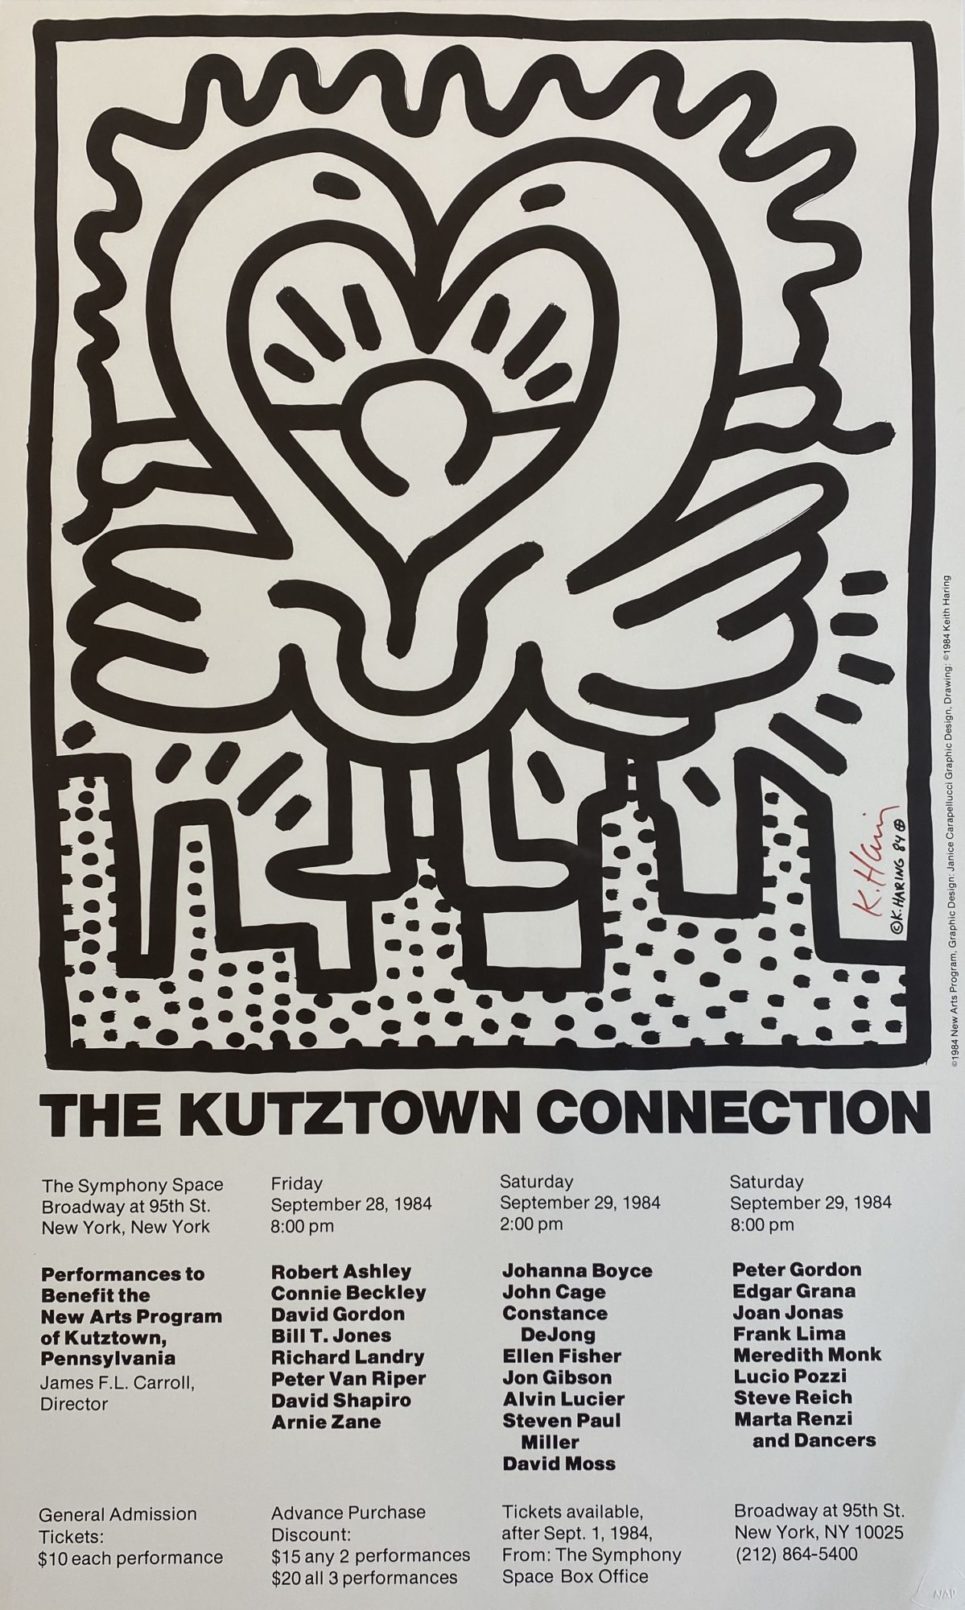 Keith Haring - The Kutztown Connection